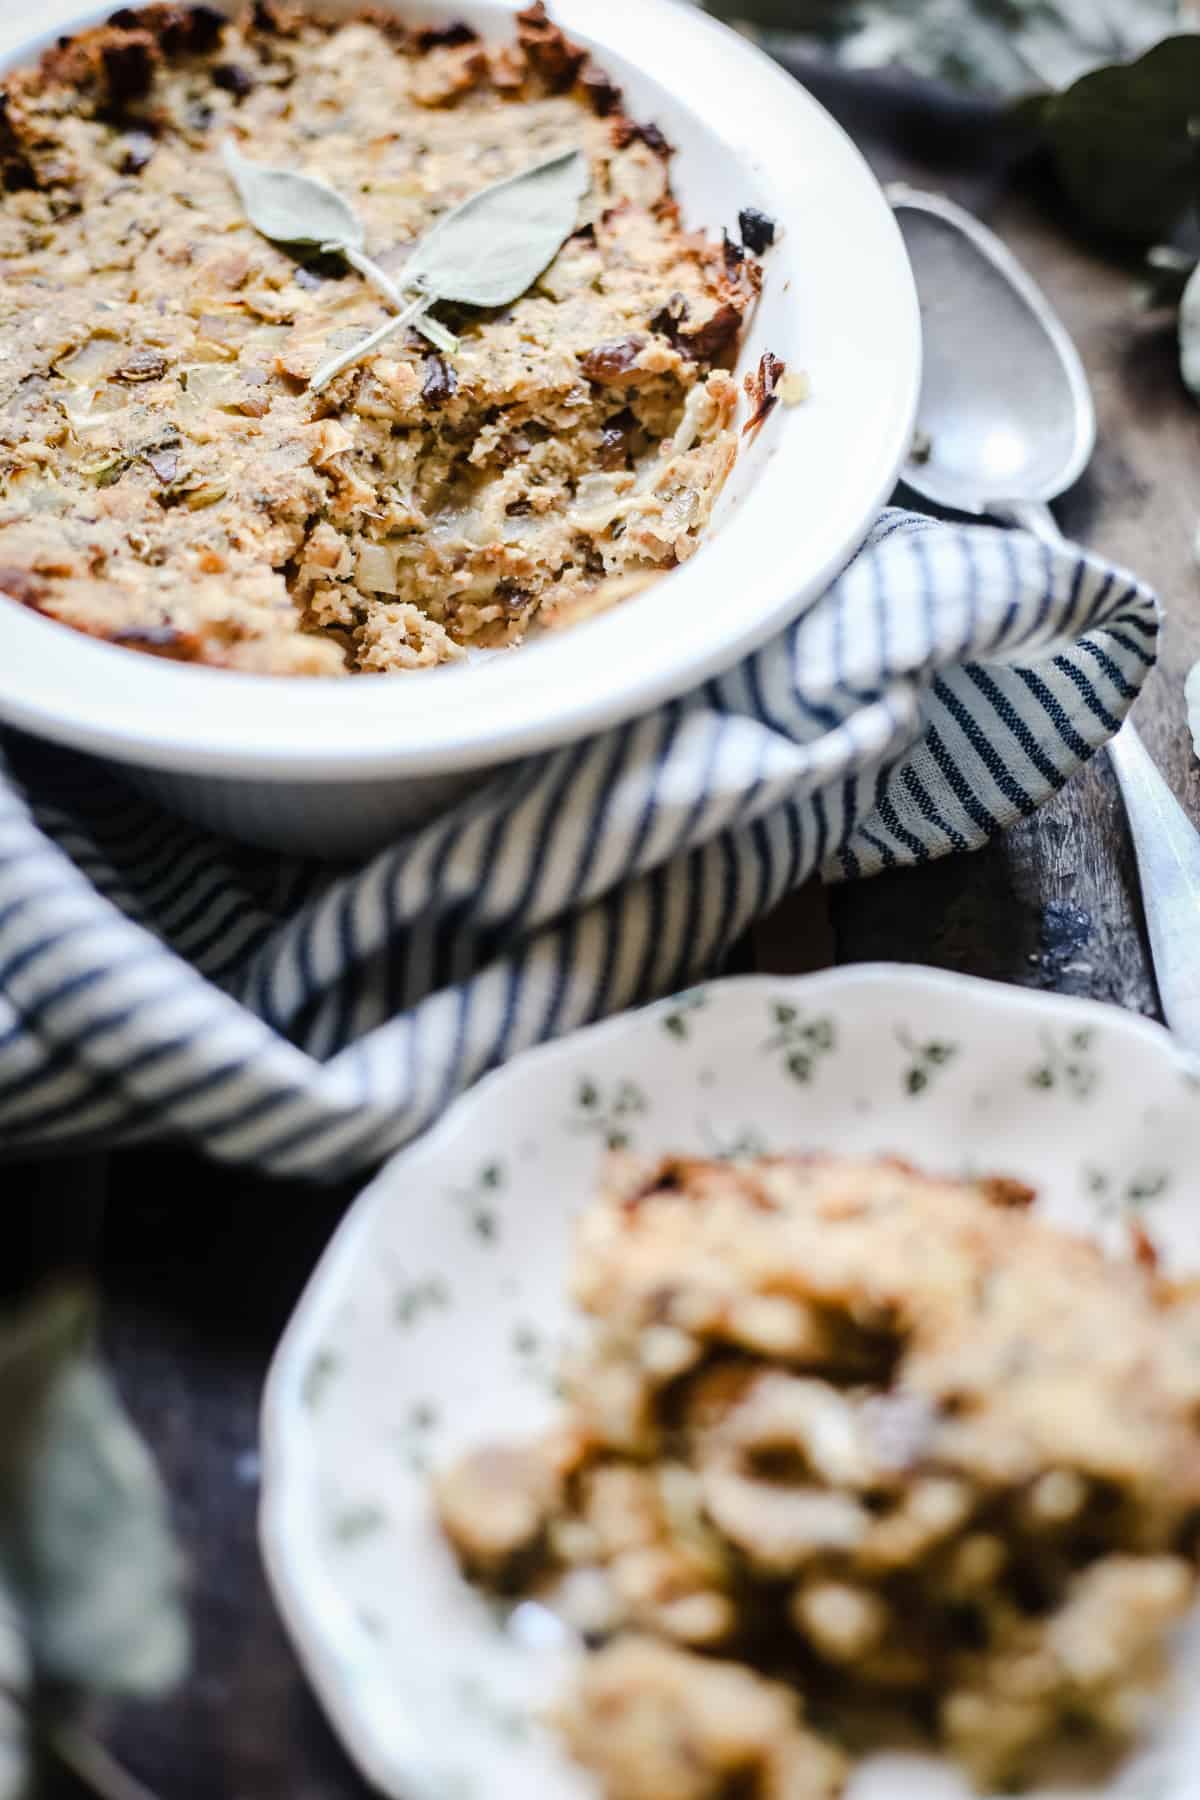 A dish of stuffing in the background with a plate of stuffing in front